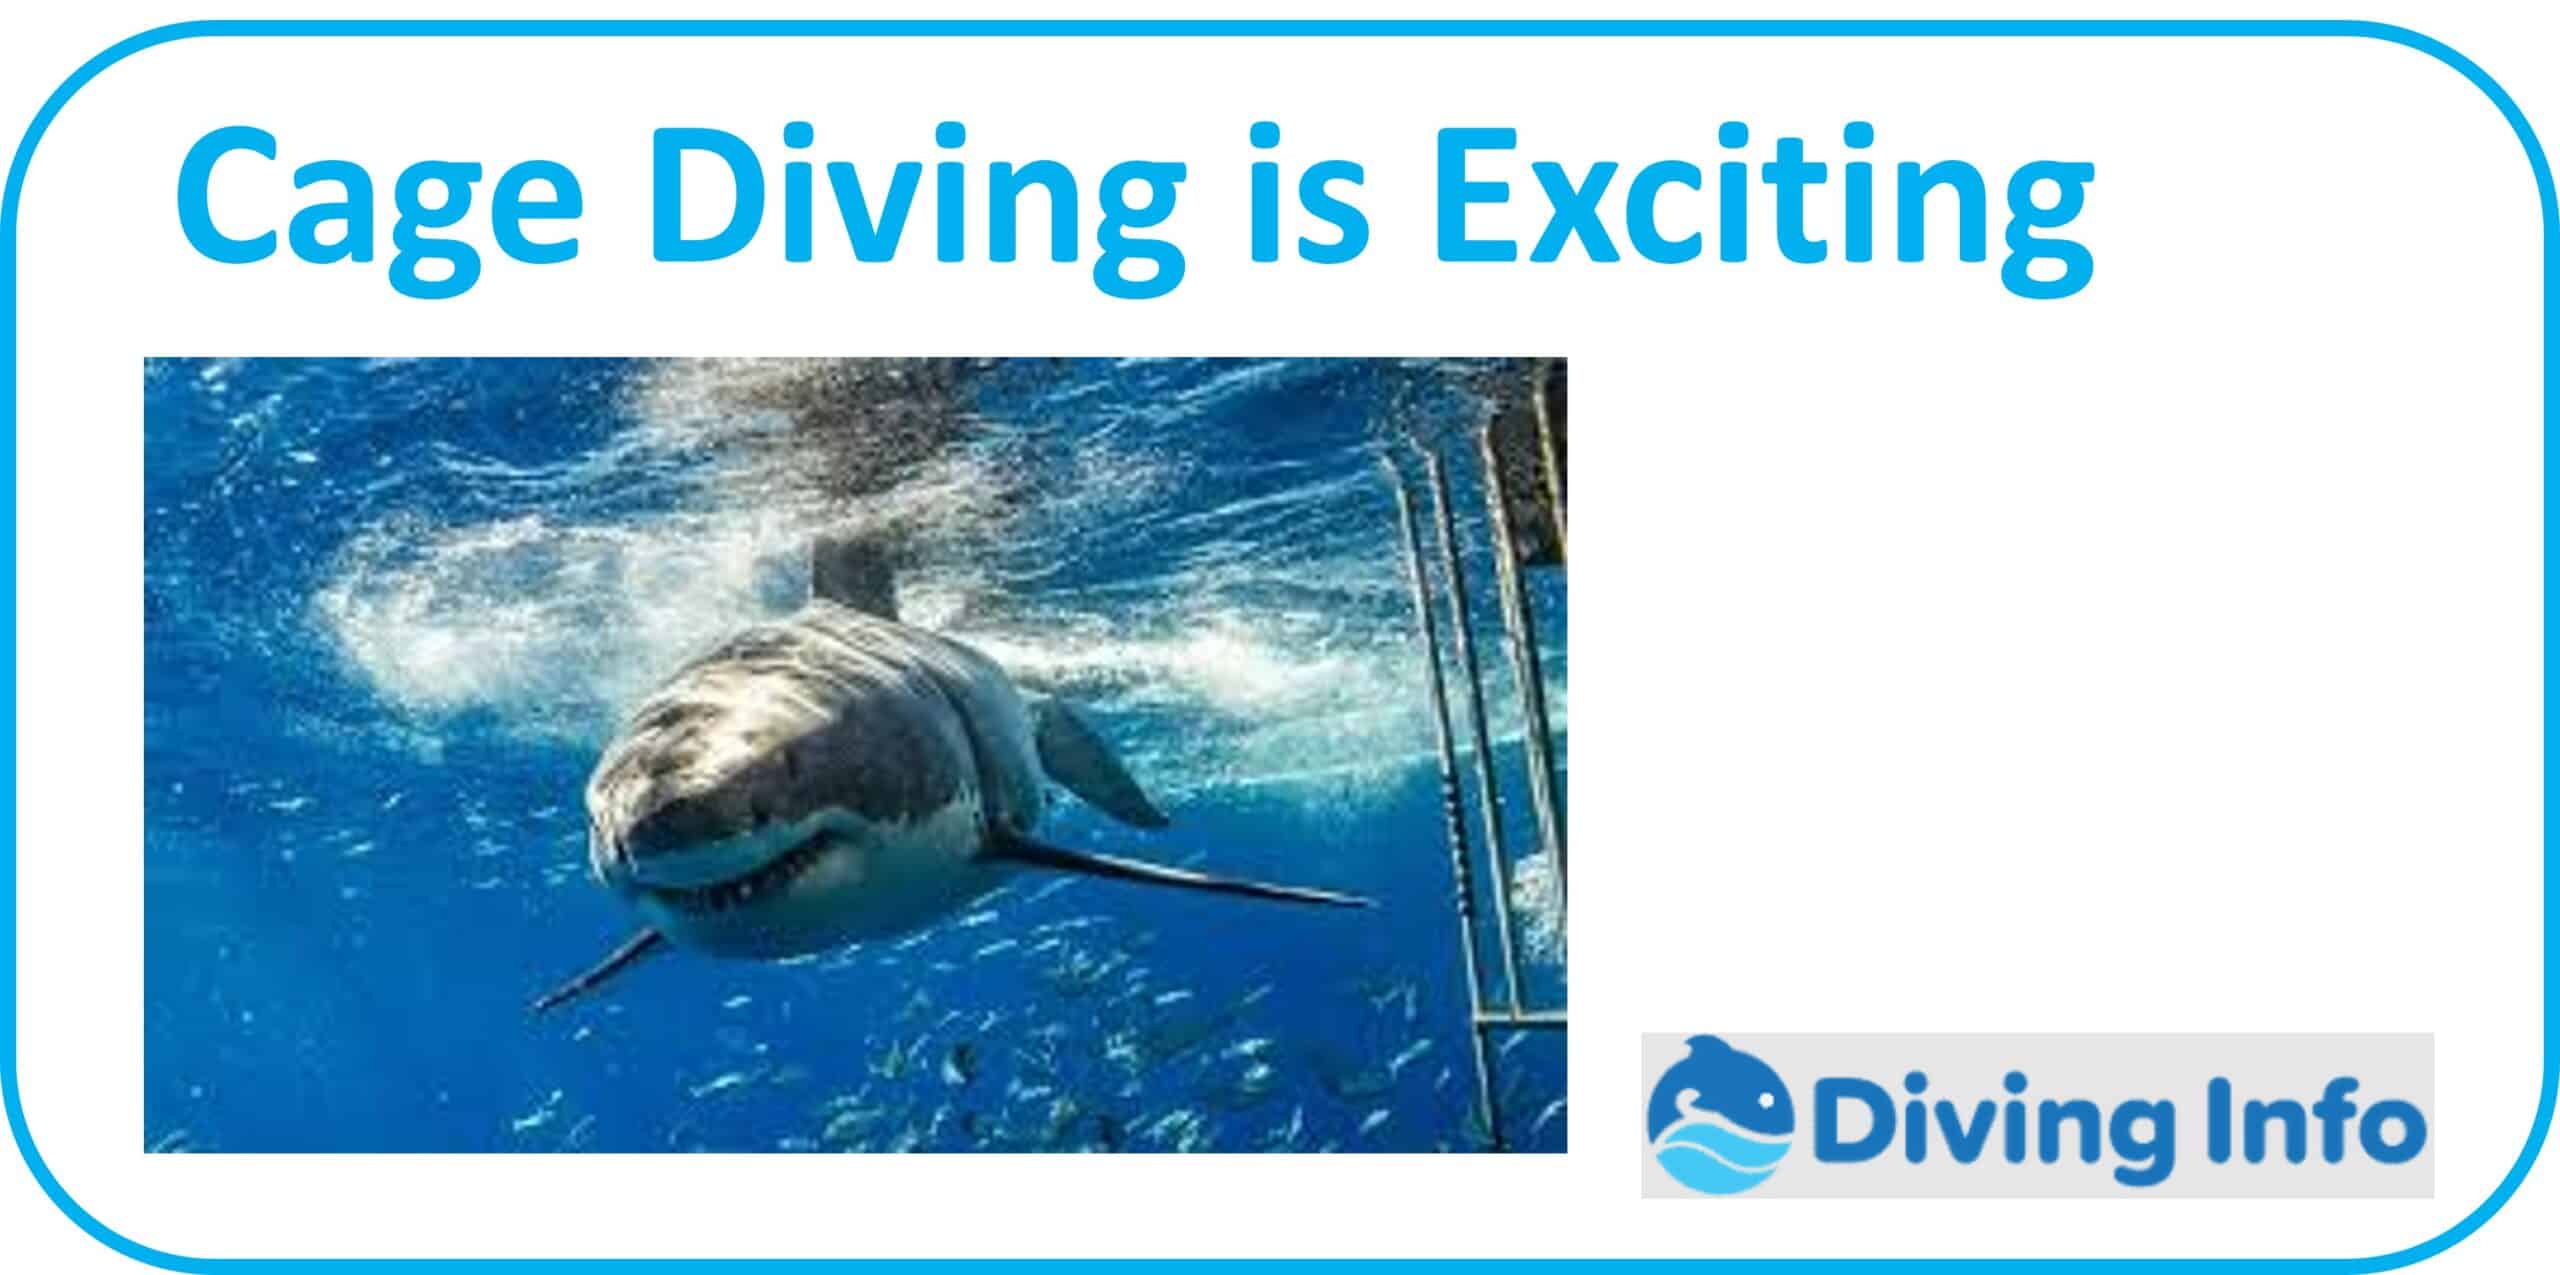 Shark Cage Diving is Exciting